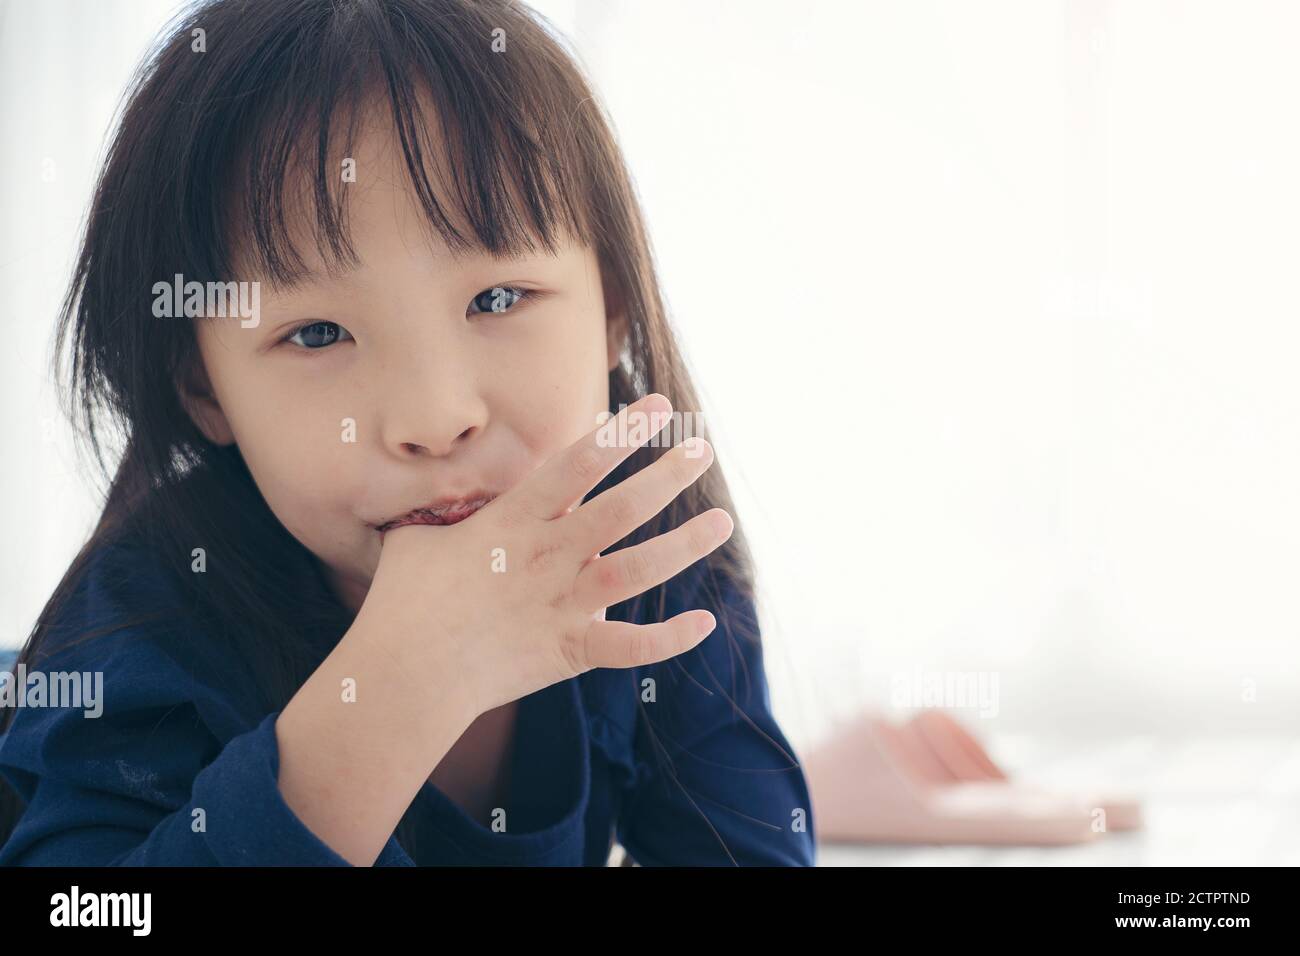 Asian kid cute girll sucking the finger her thumb Stock Photo